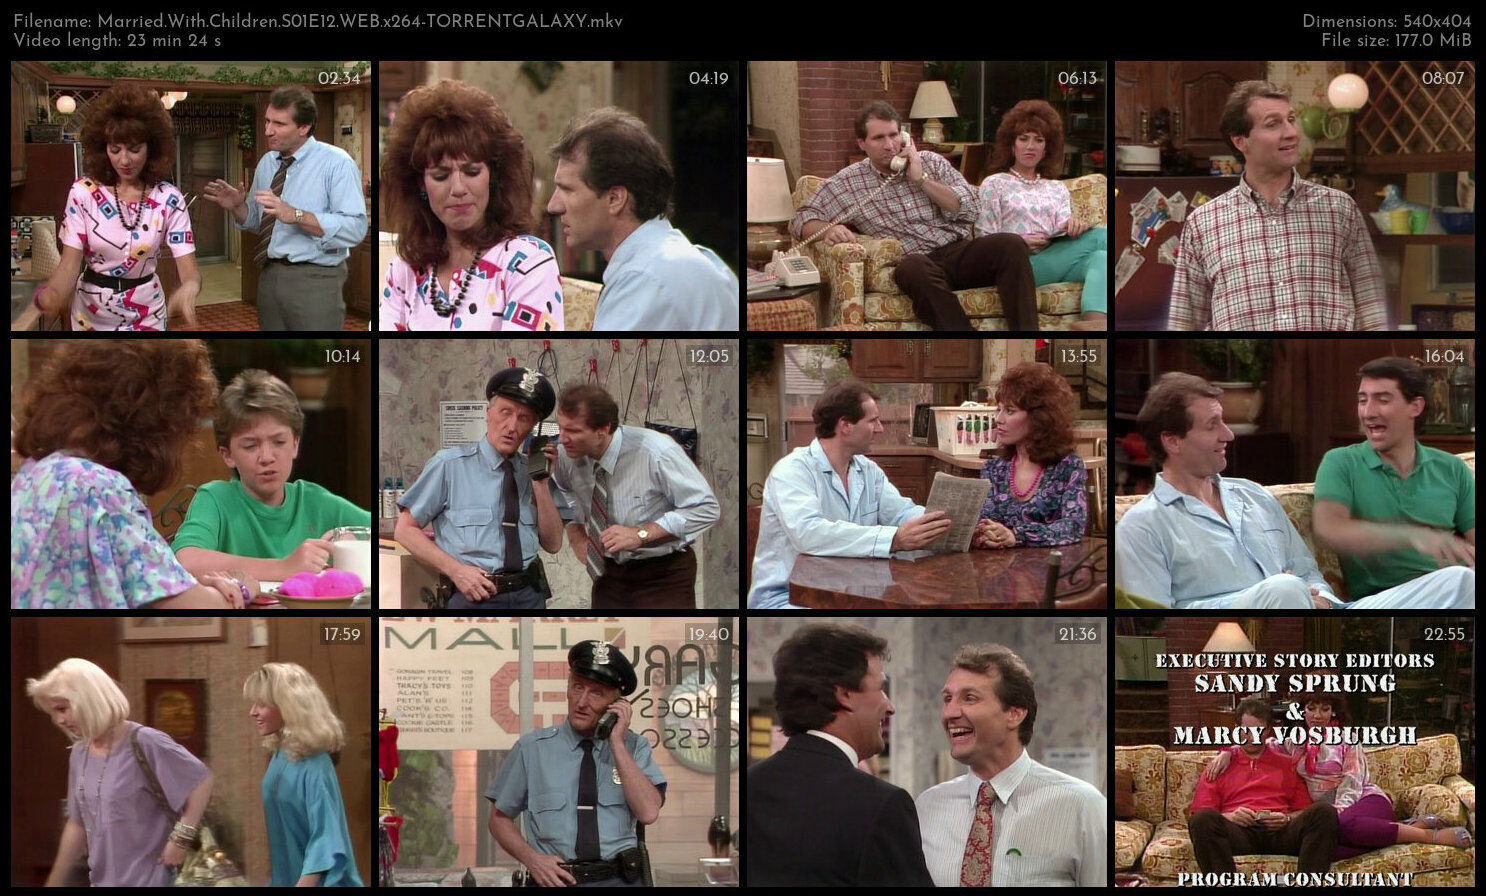 Married With Children S01E12 WEB x264 TORRENTGALAXY